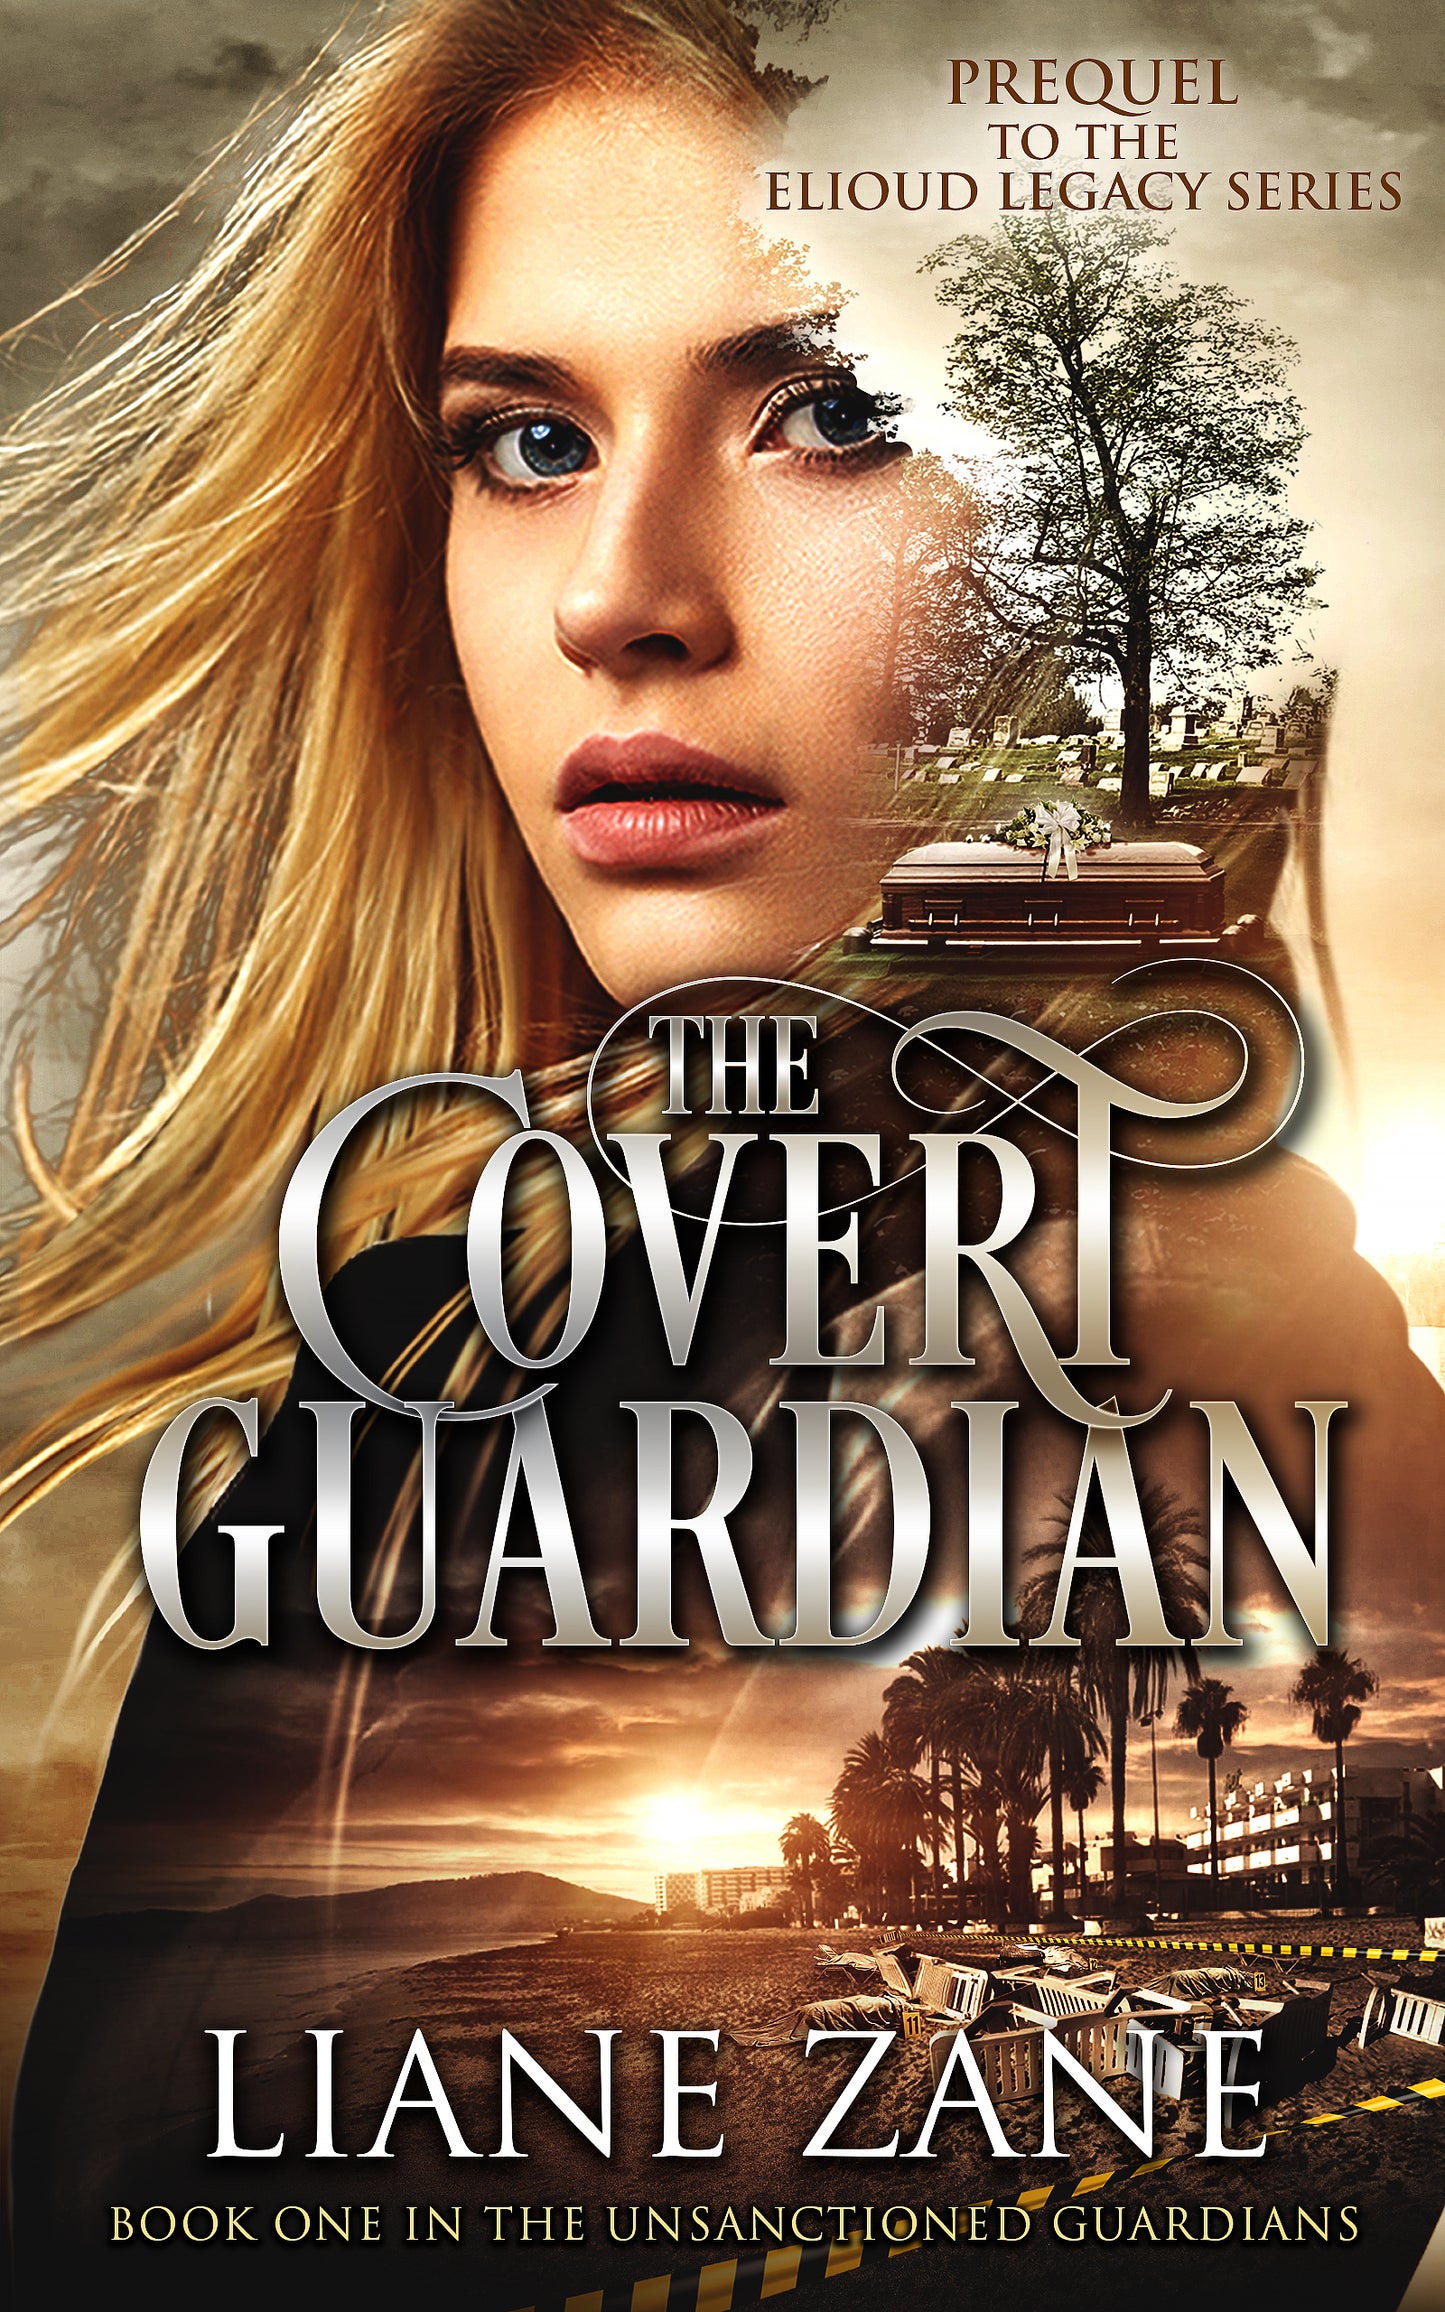 The Covert Guardian (The Unsanctioned Guardians Book 1)